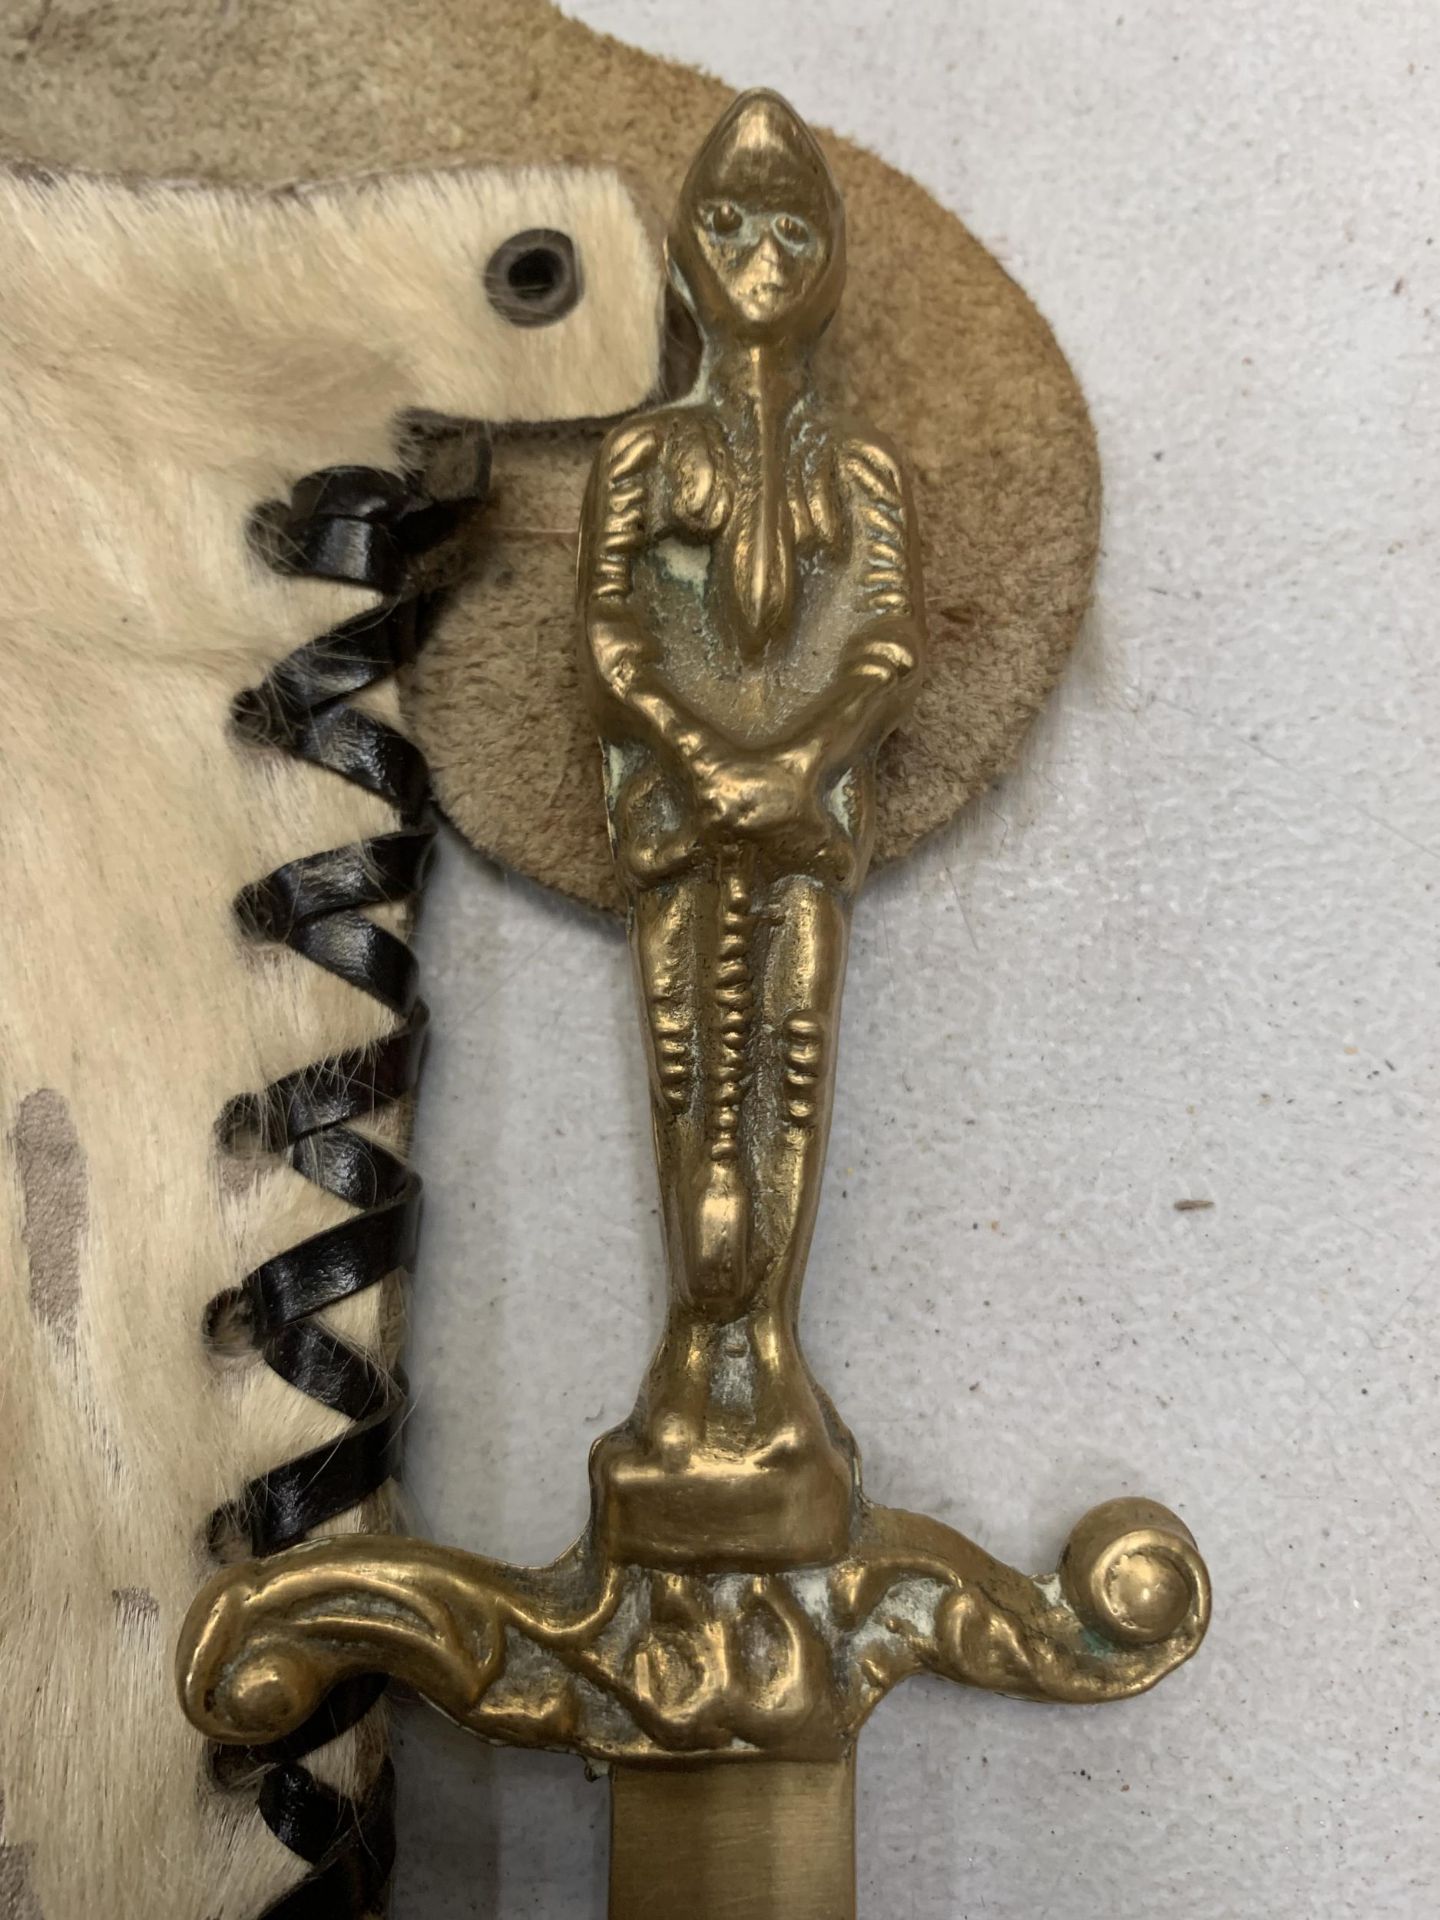 AN ORNATE KNIFE IN AN ANIMAL SKIN SHEATH AND A BRASS LETTER OPENER - Image 2 of 4